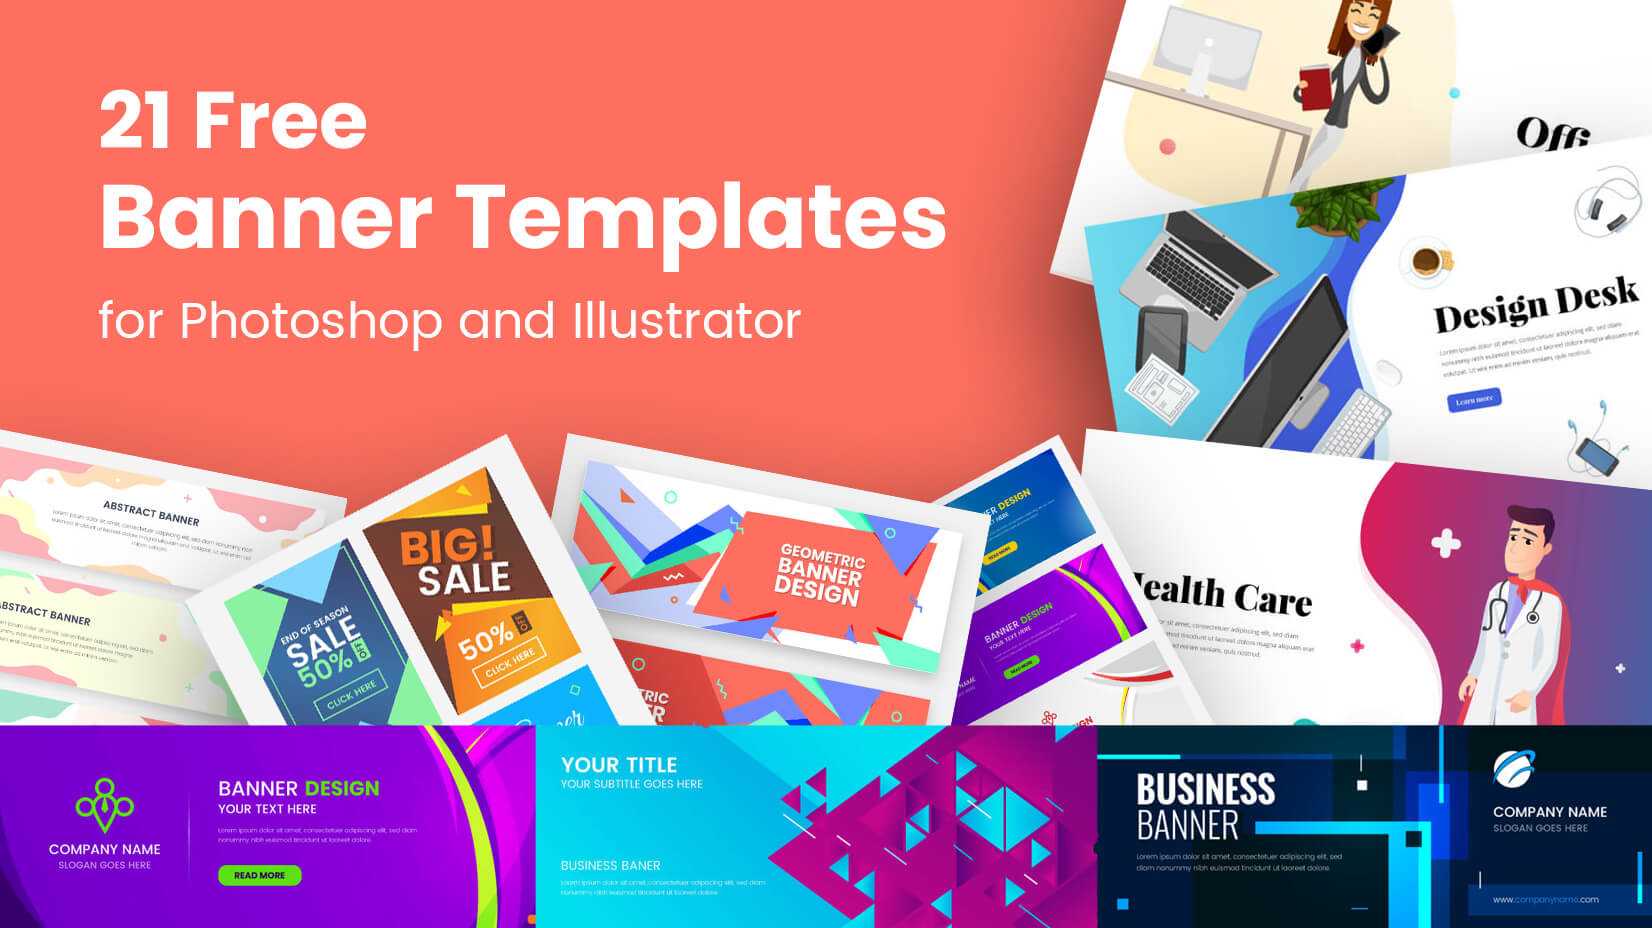 21 Free Banner Templates For Photoshop And Illustrator Pertaining To Banner Template For Photoshop